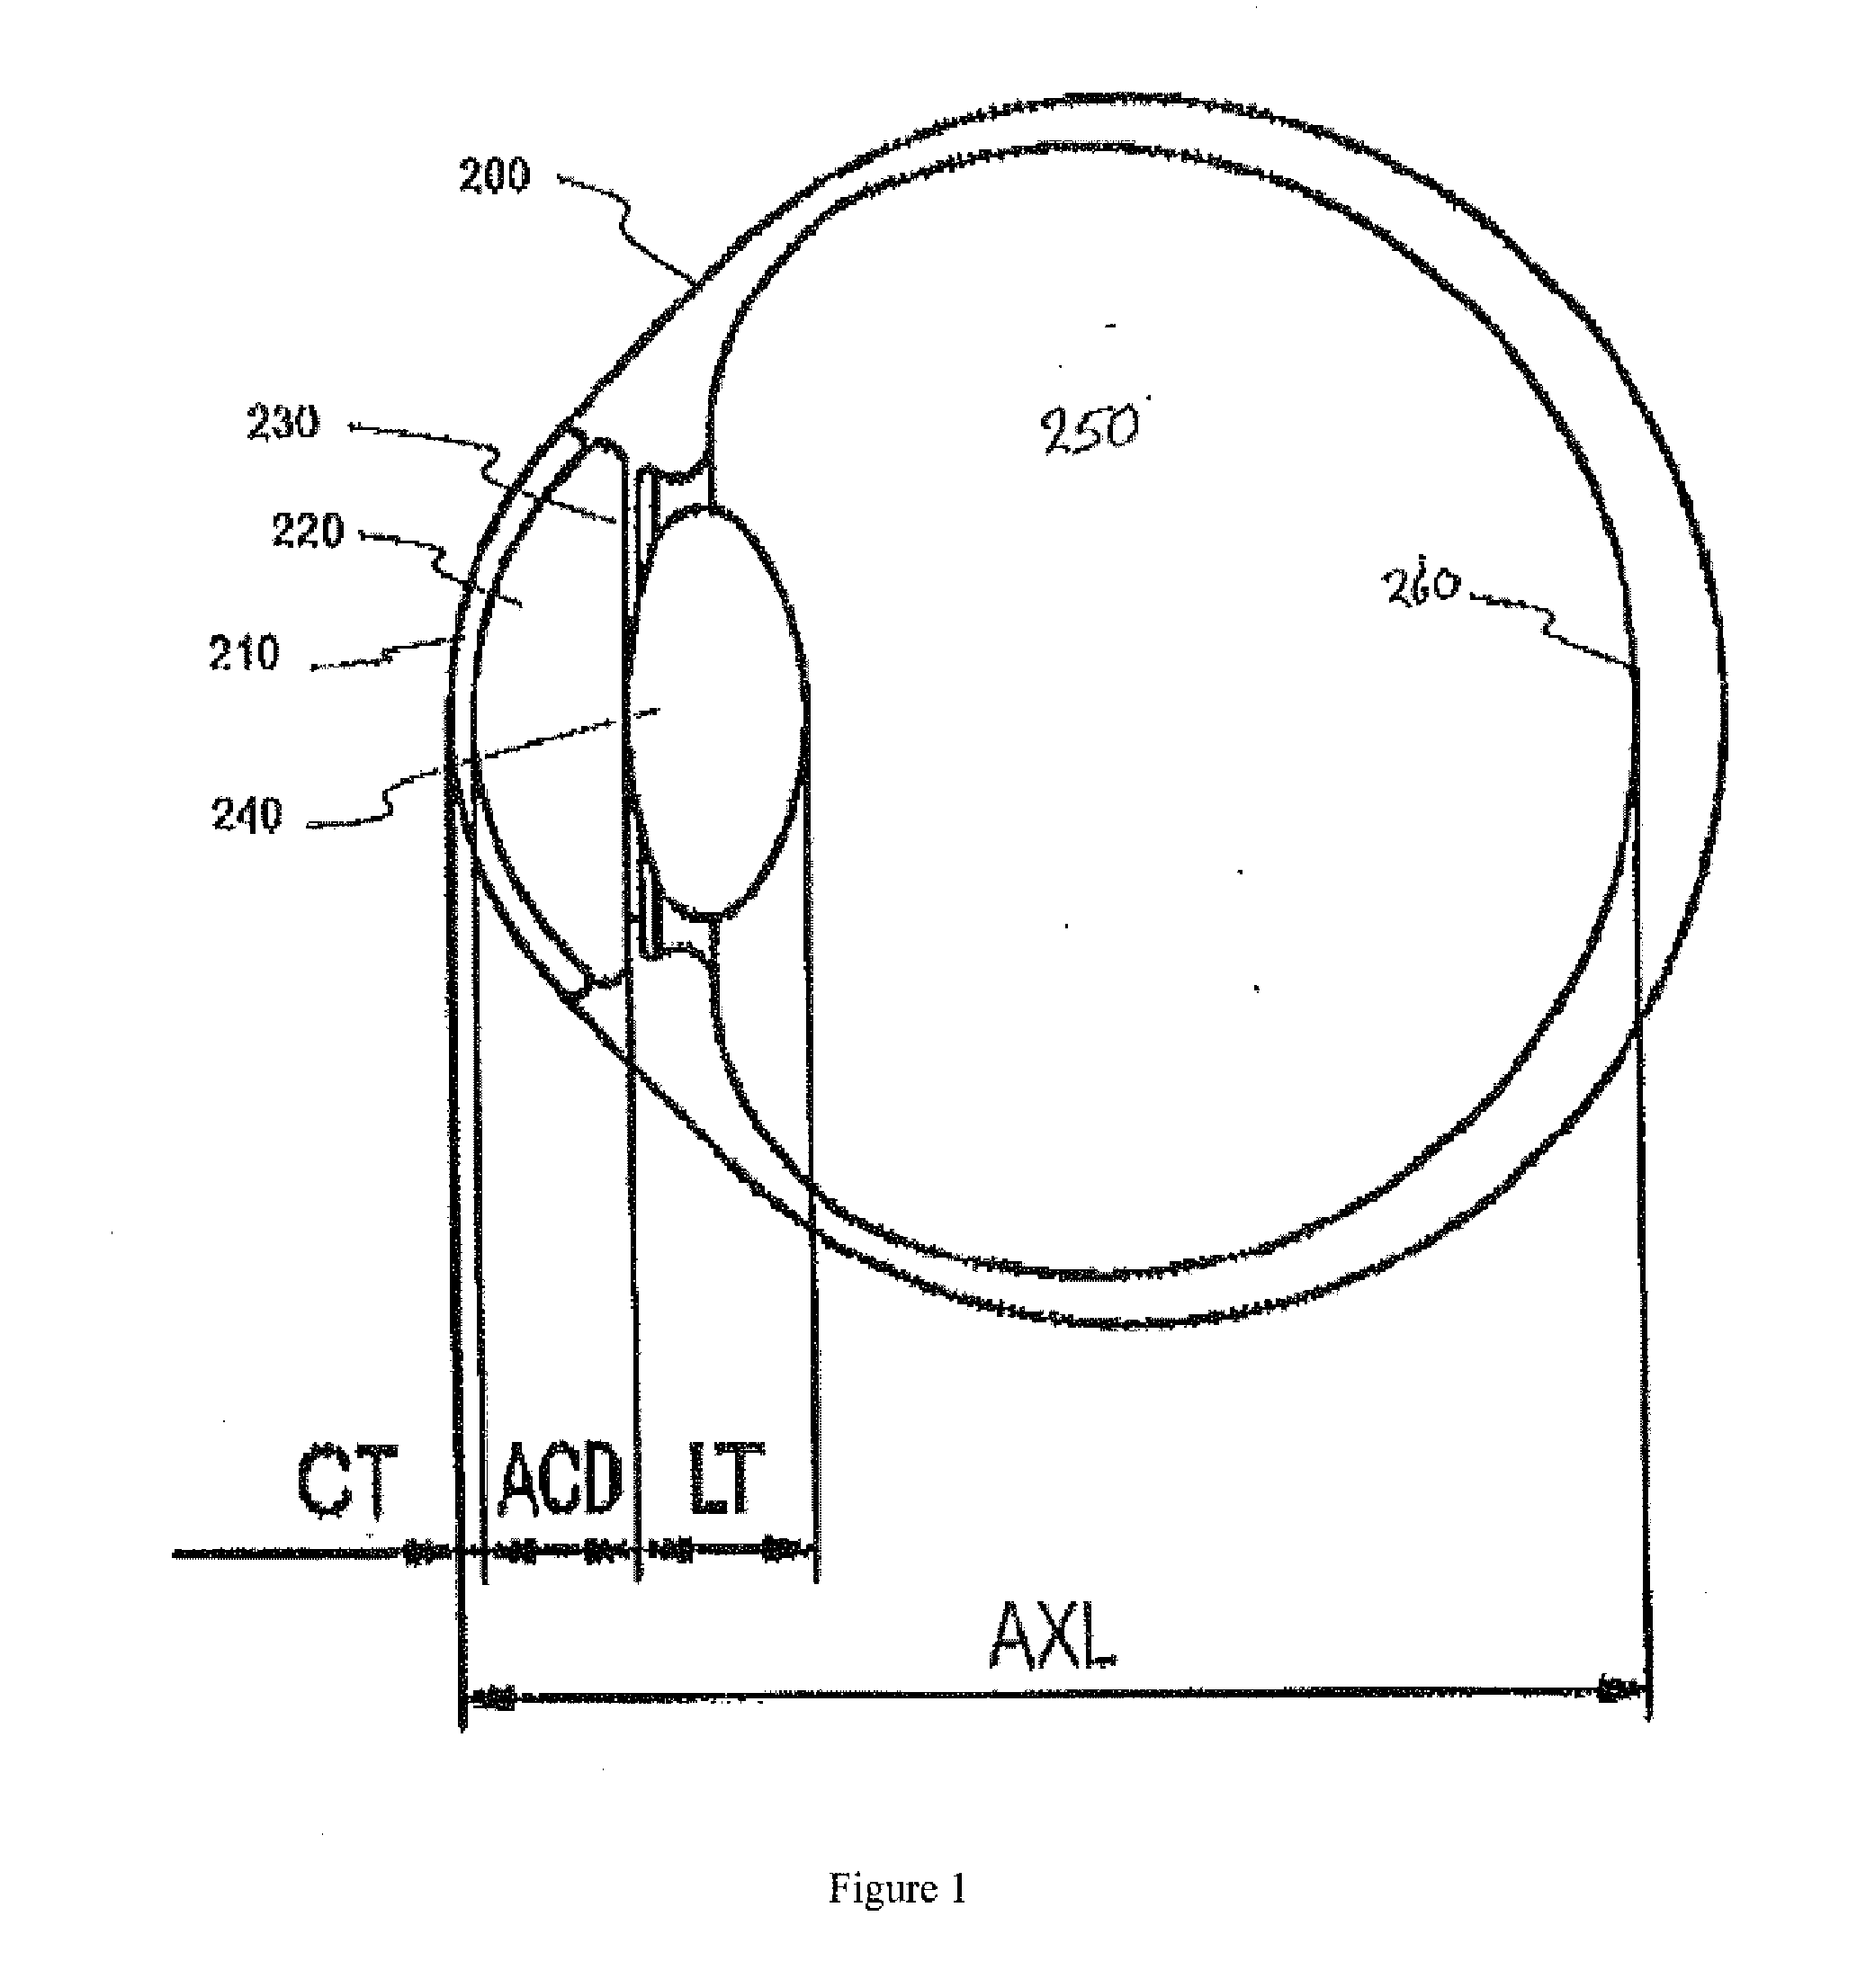 Lenses, systems and methods for providing binocular customized treatments to correct presbyopia